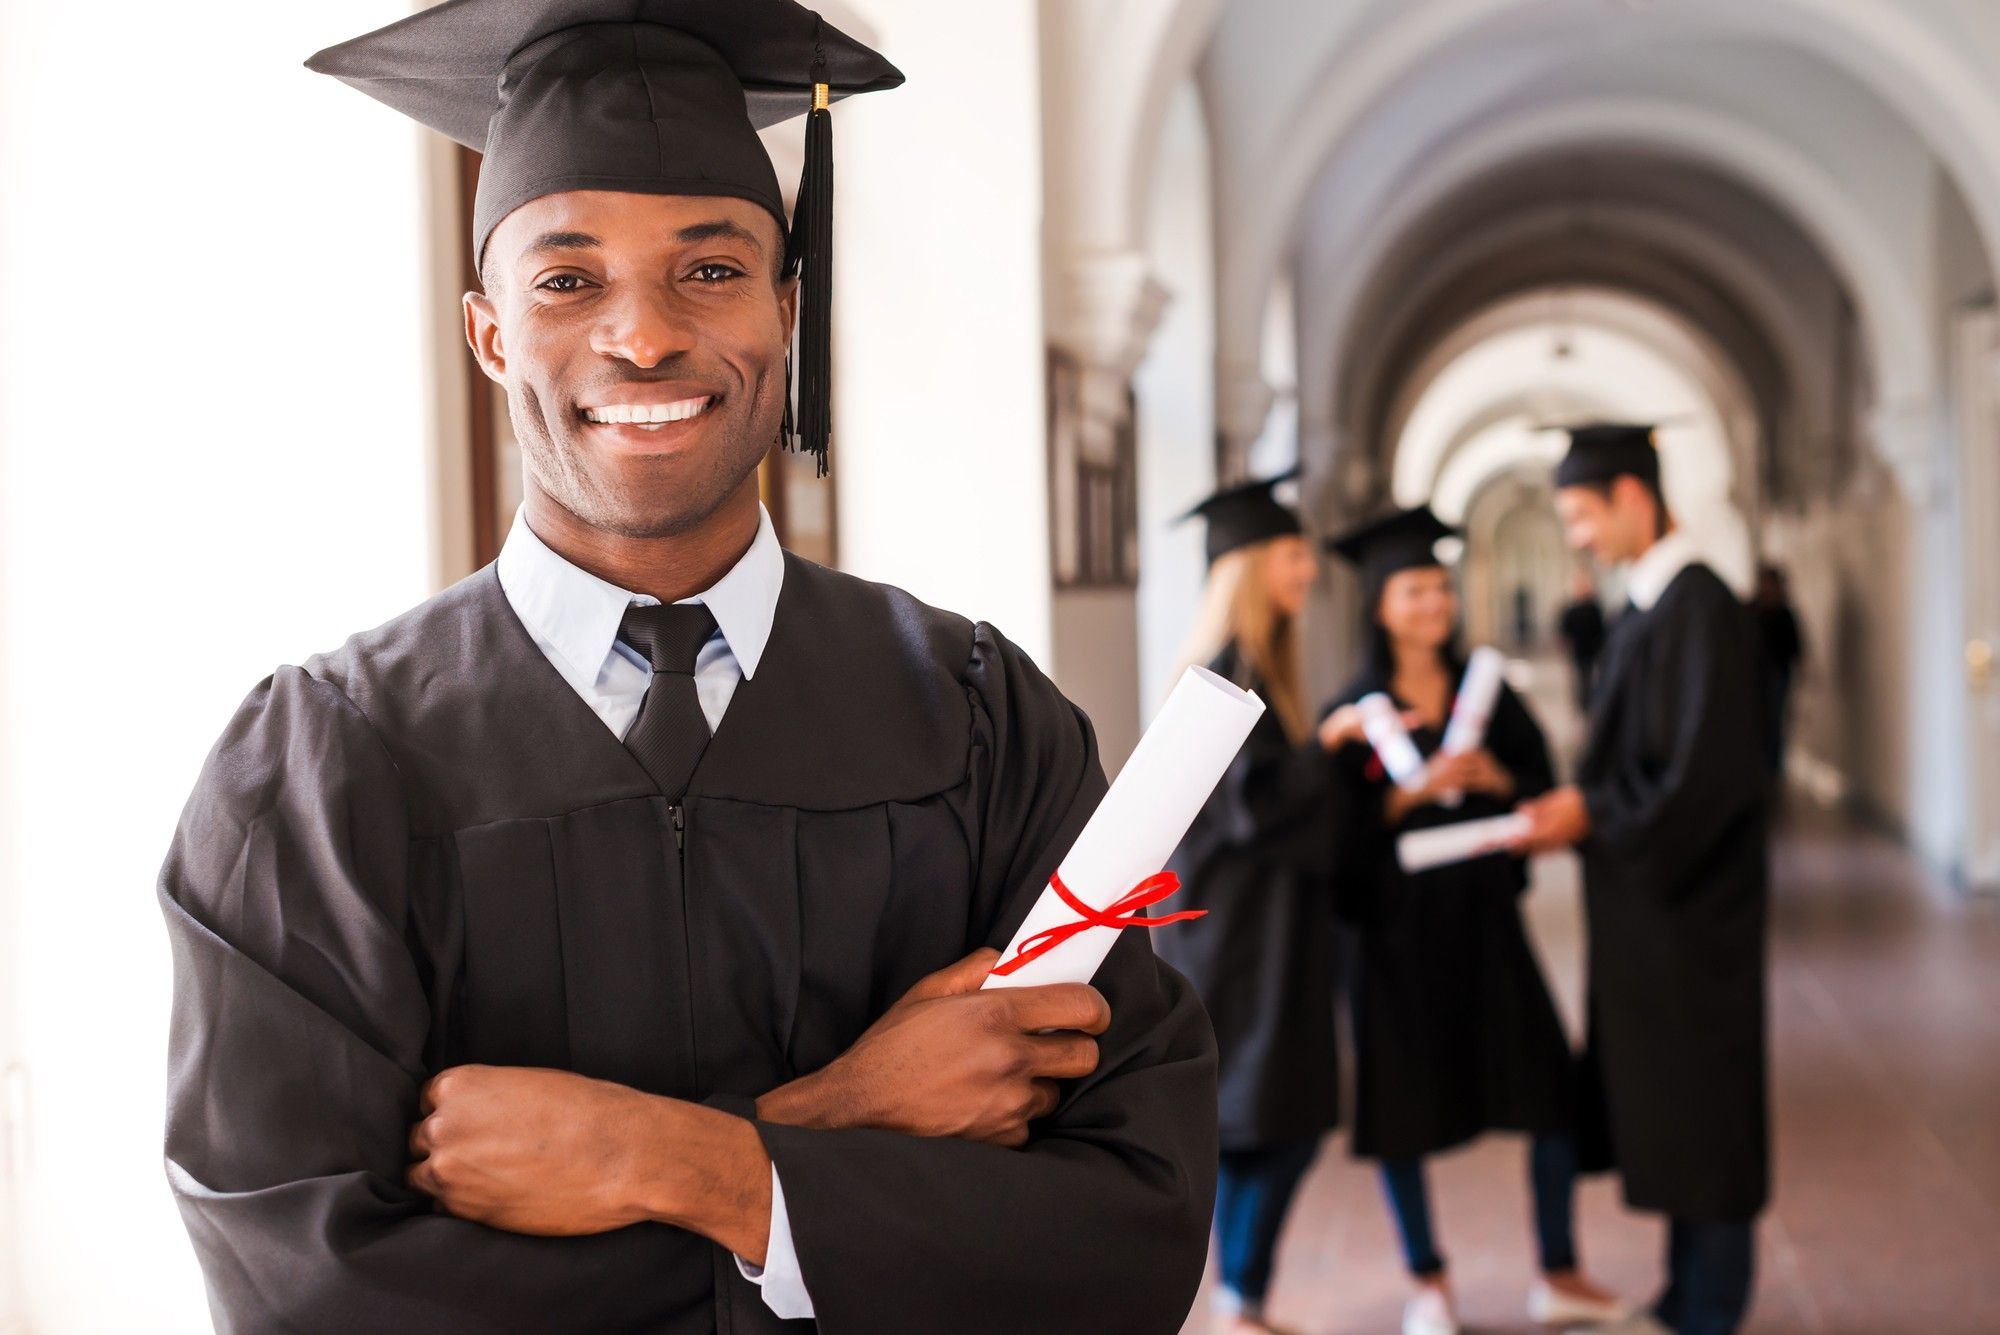 Loan rehabilitation may help with student loans.